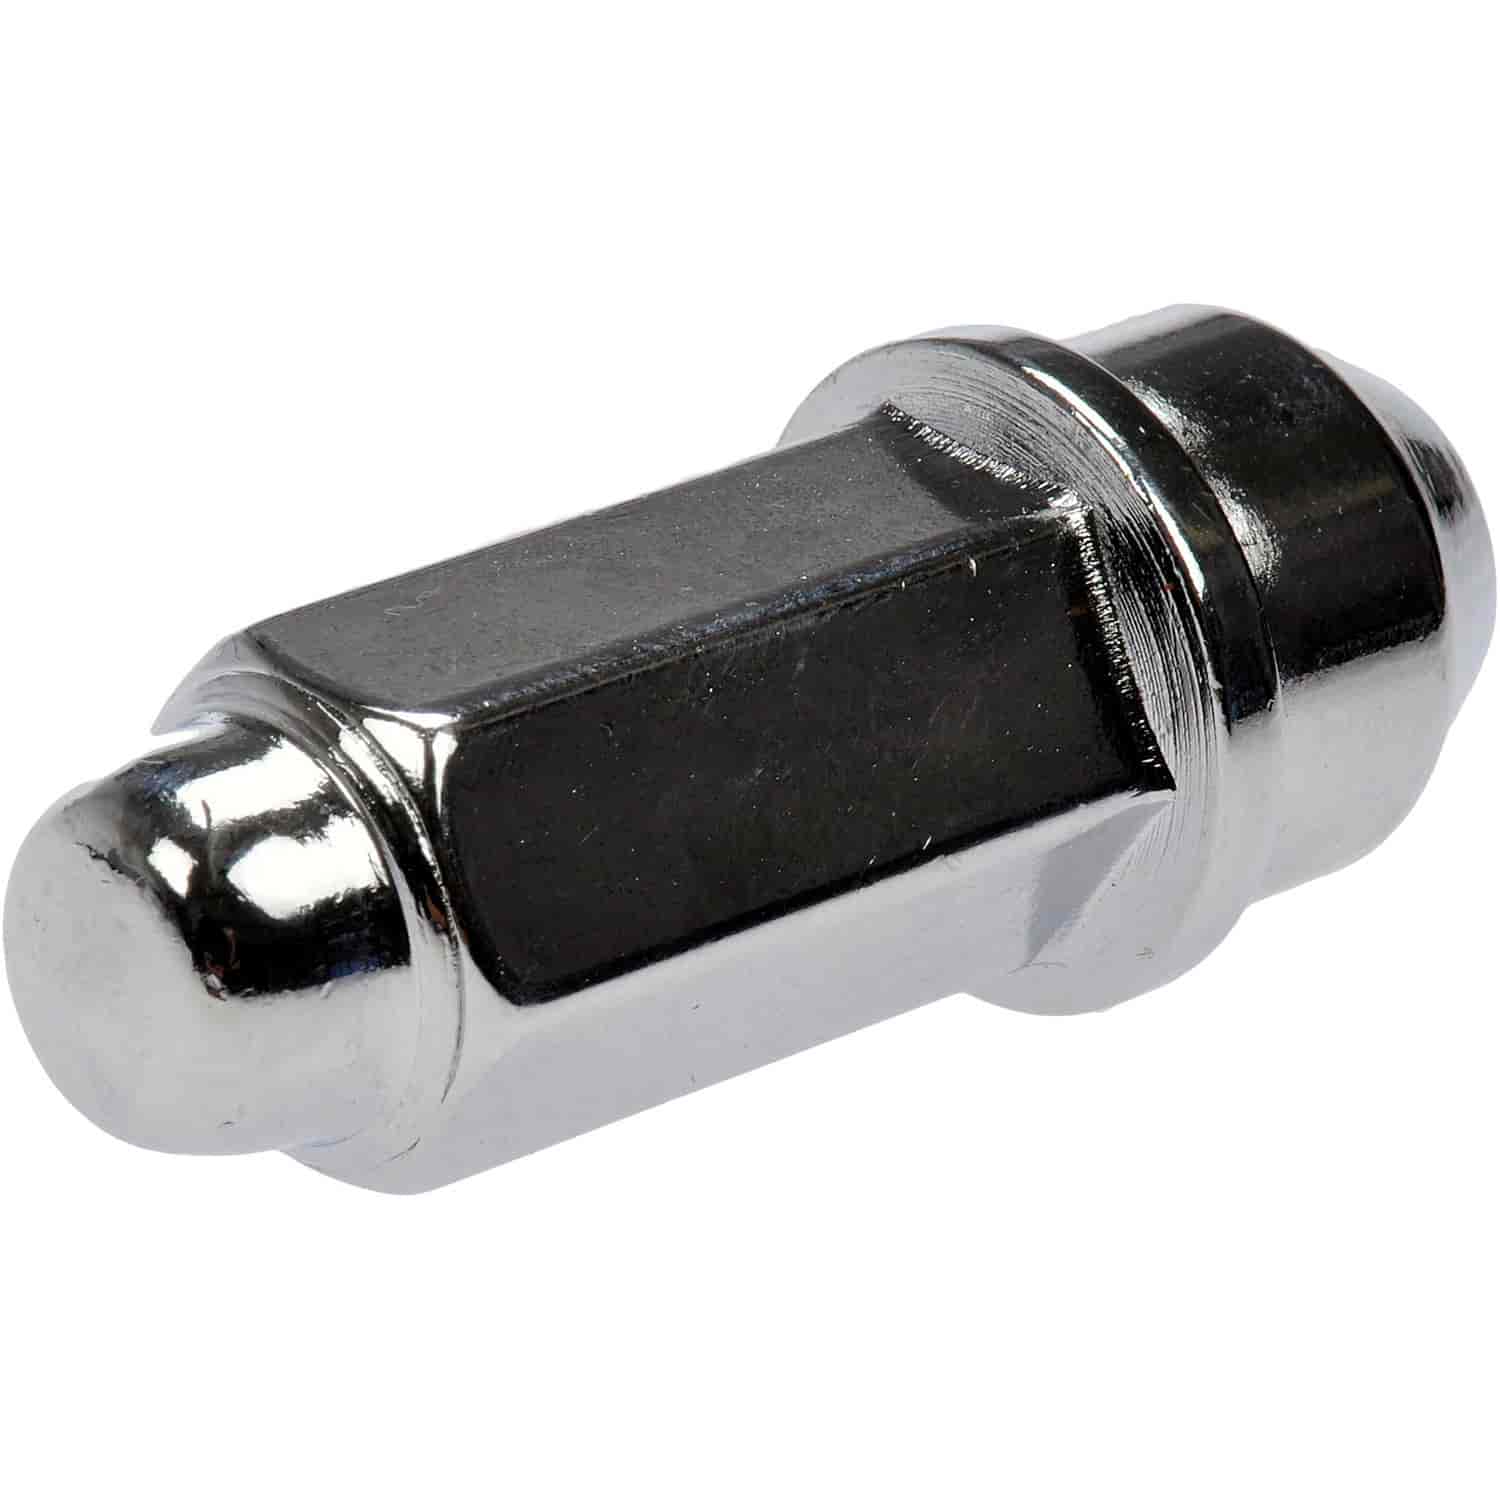 Wheel Nut M12-1.50 Dometop Capped - 19mm Hex 63.3mm Length